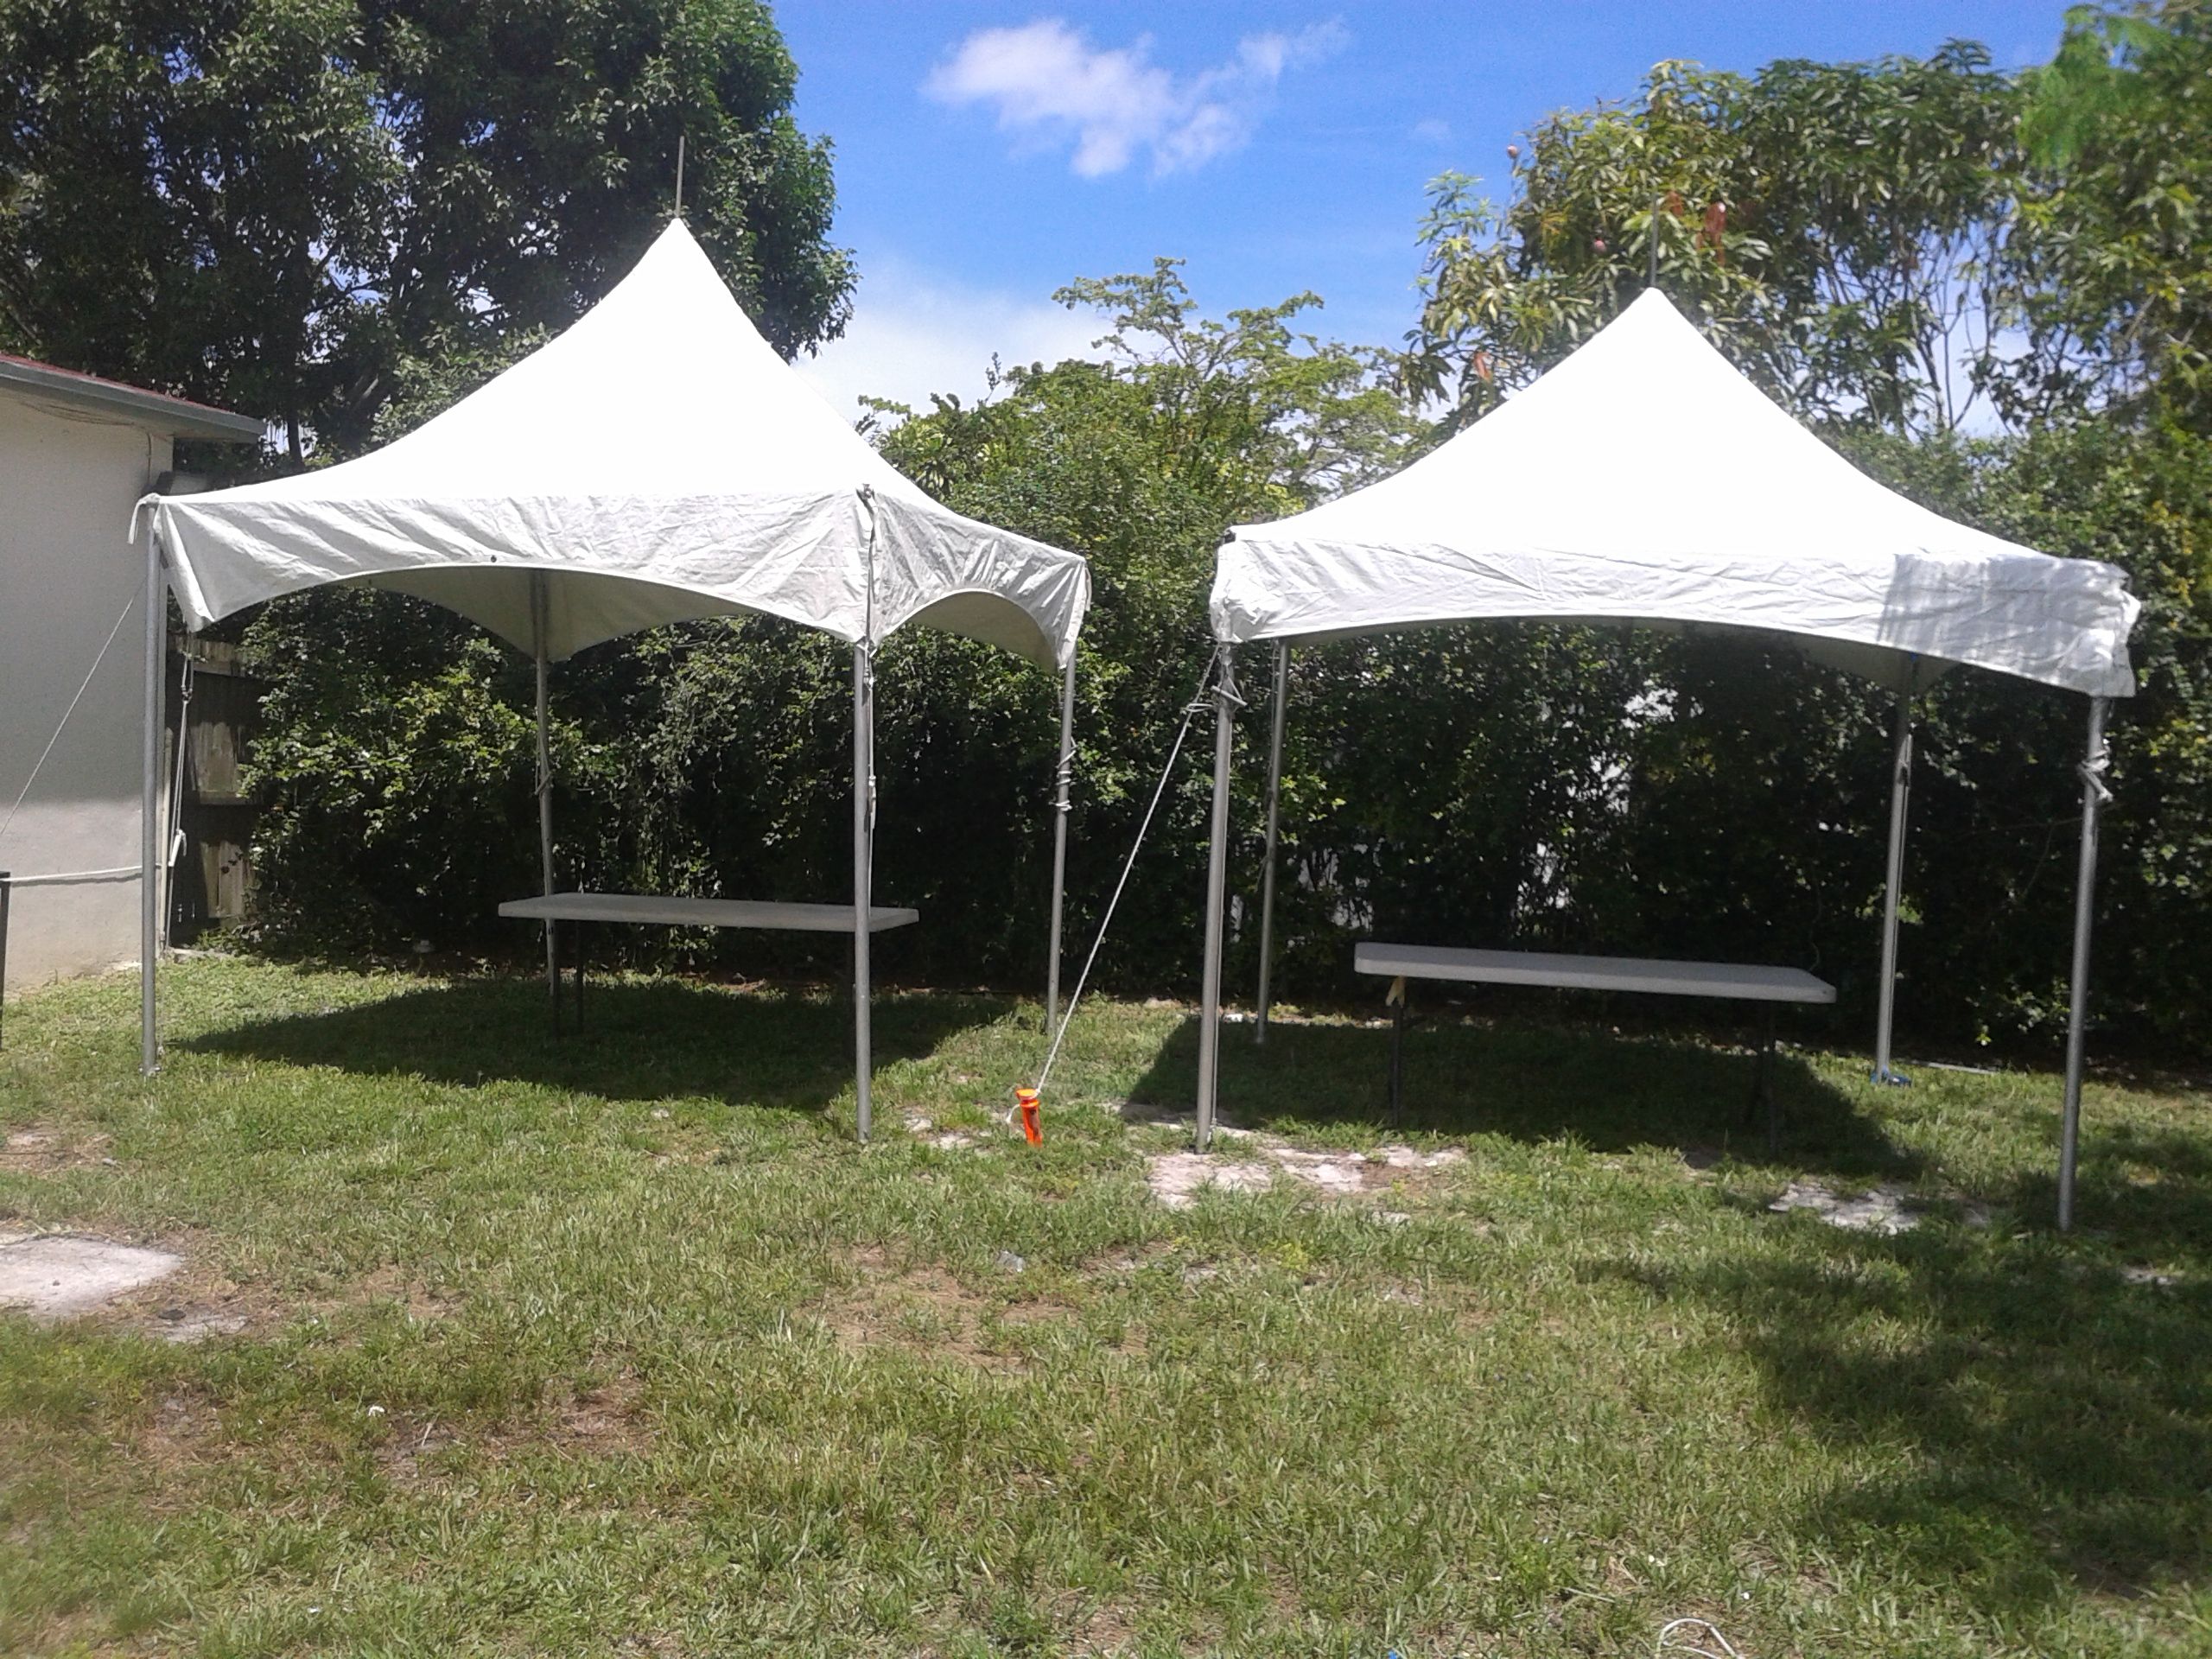 10x10 hi pek. Tents for sale for sale.